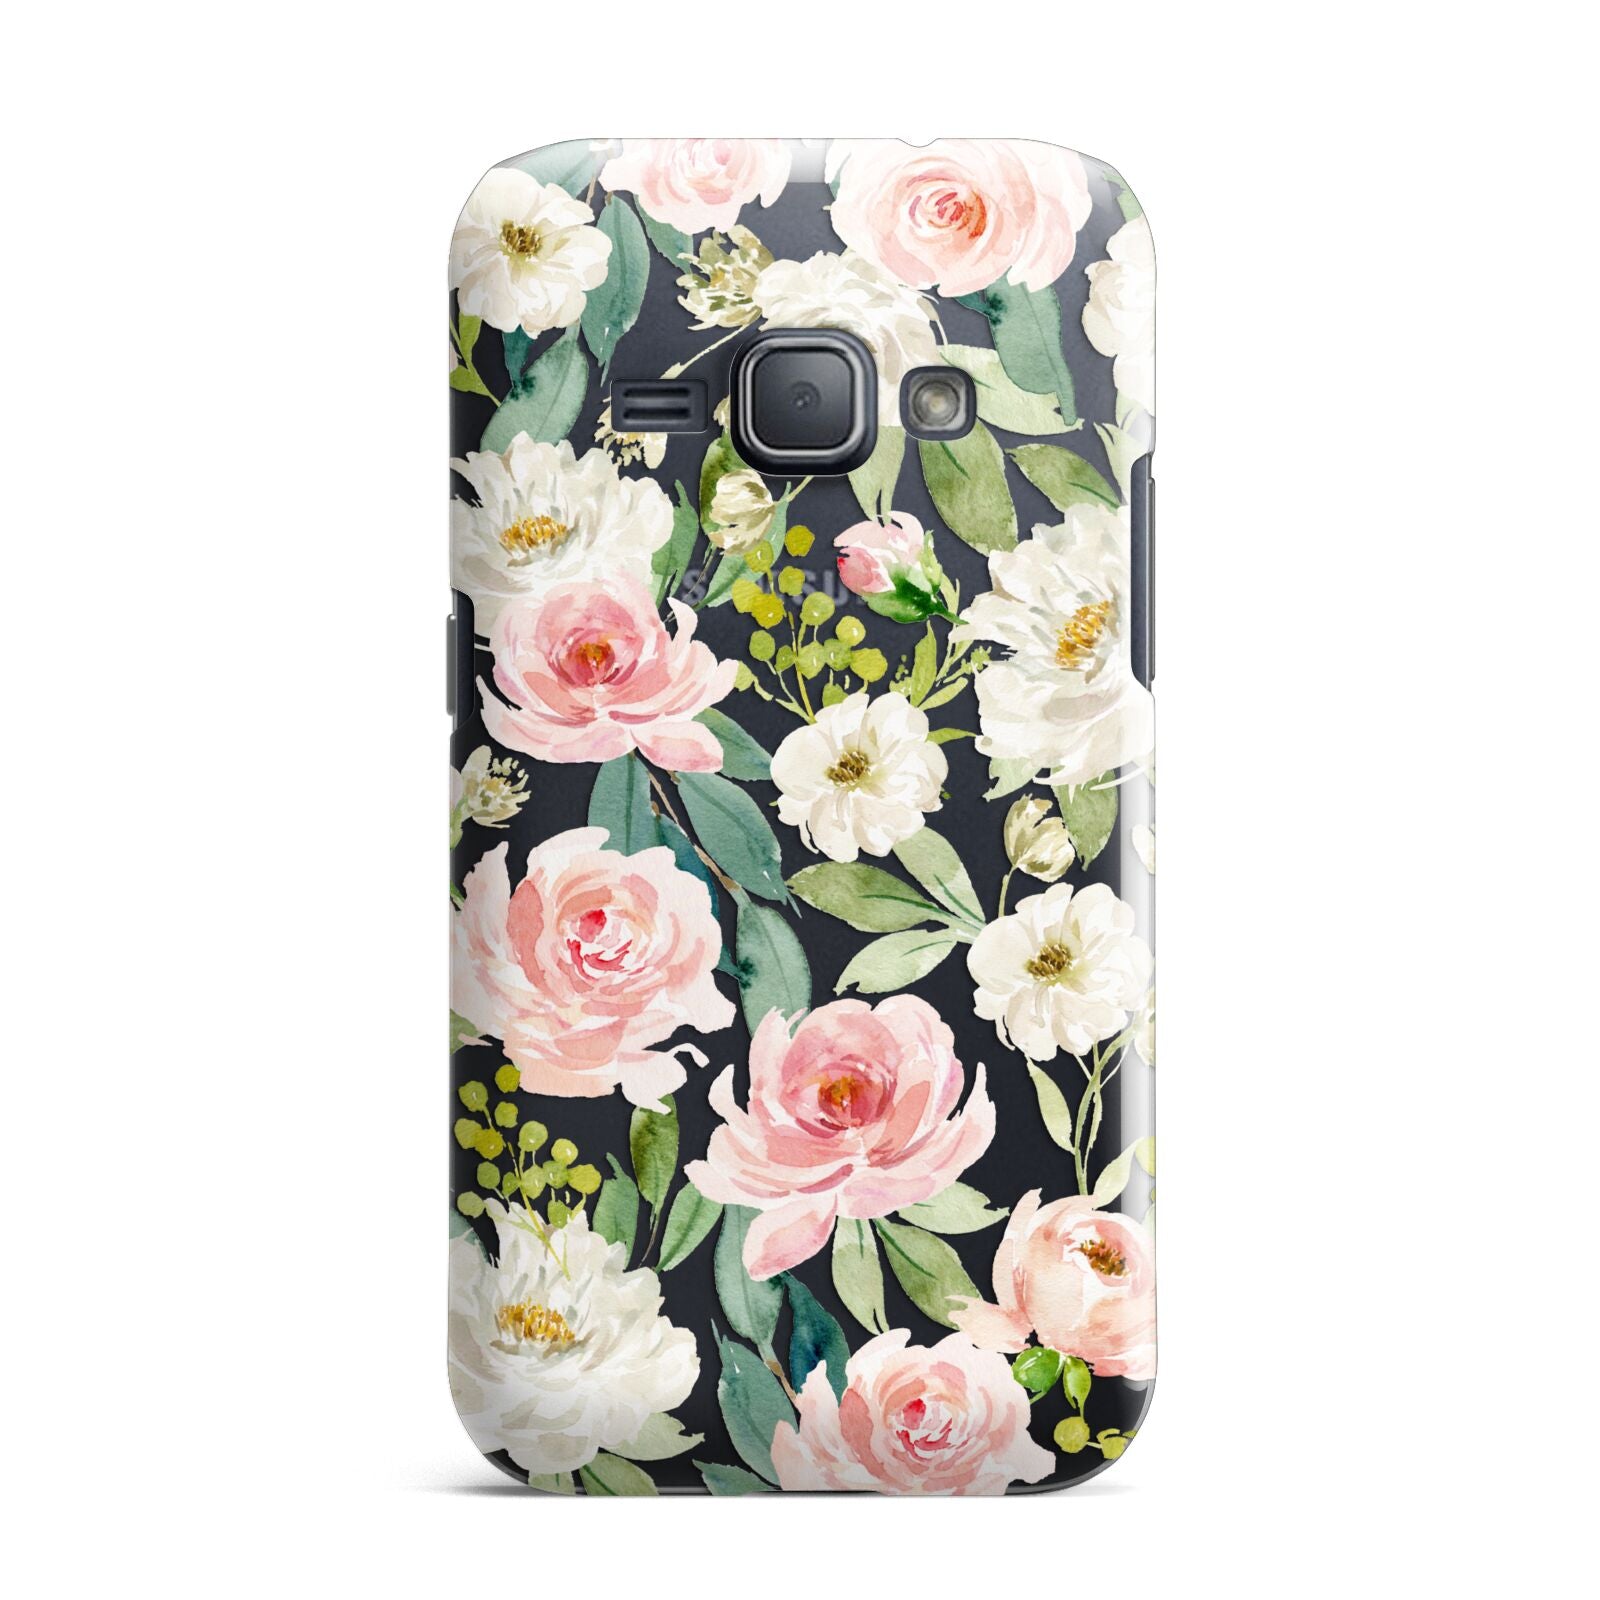 Watercolour Peonies Roses and Foliage Samsung Galaxy J1 2016 Case